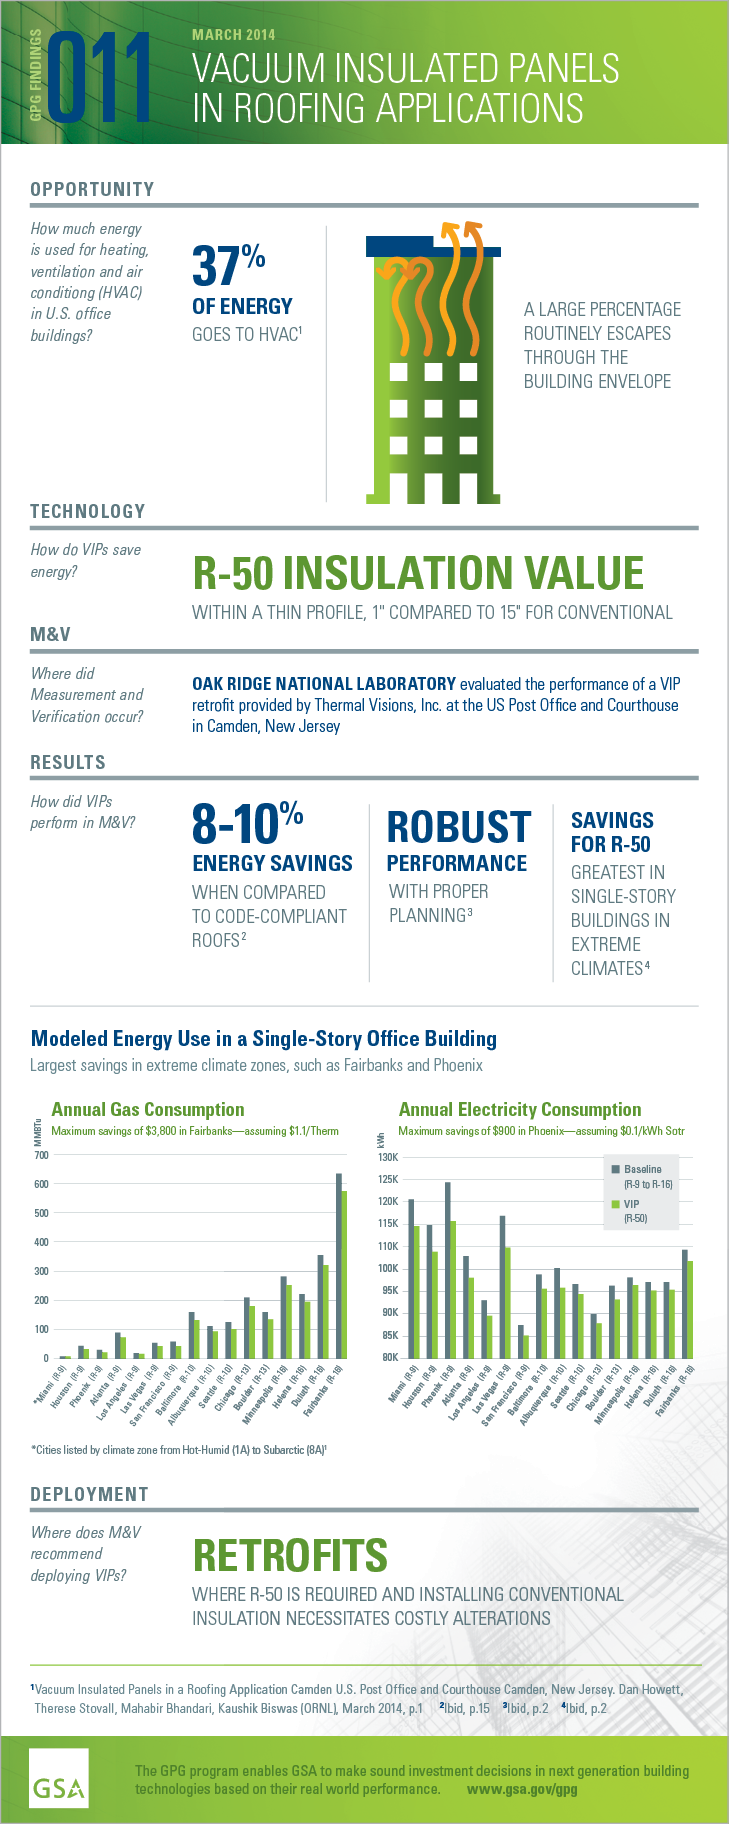 Download the PDF of the full-size infographic for GPG011 Vacuum-Insulated Panels.